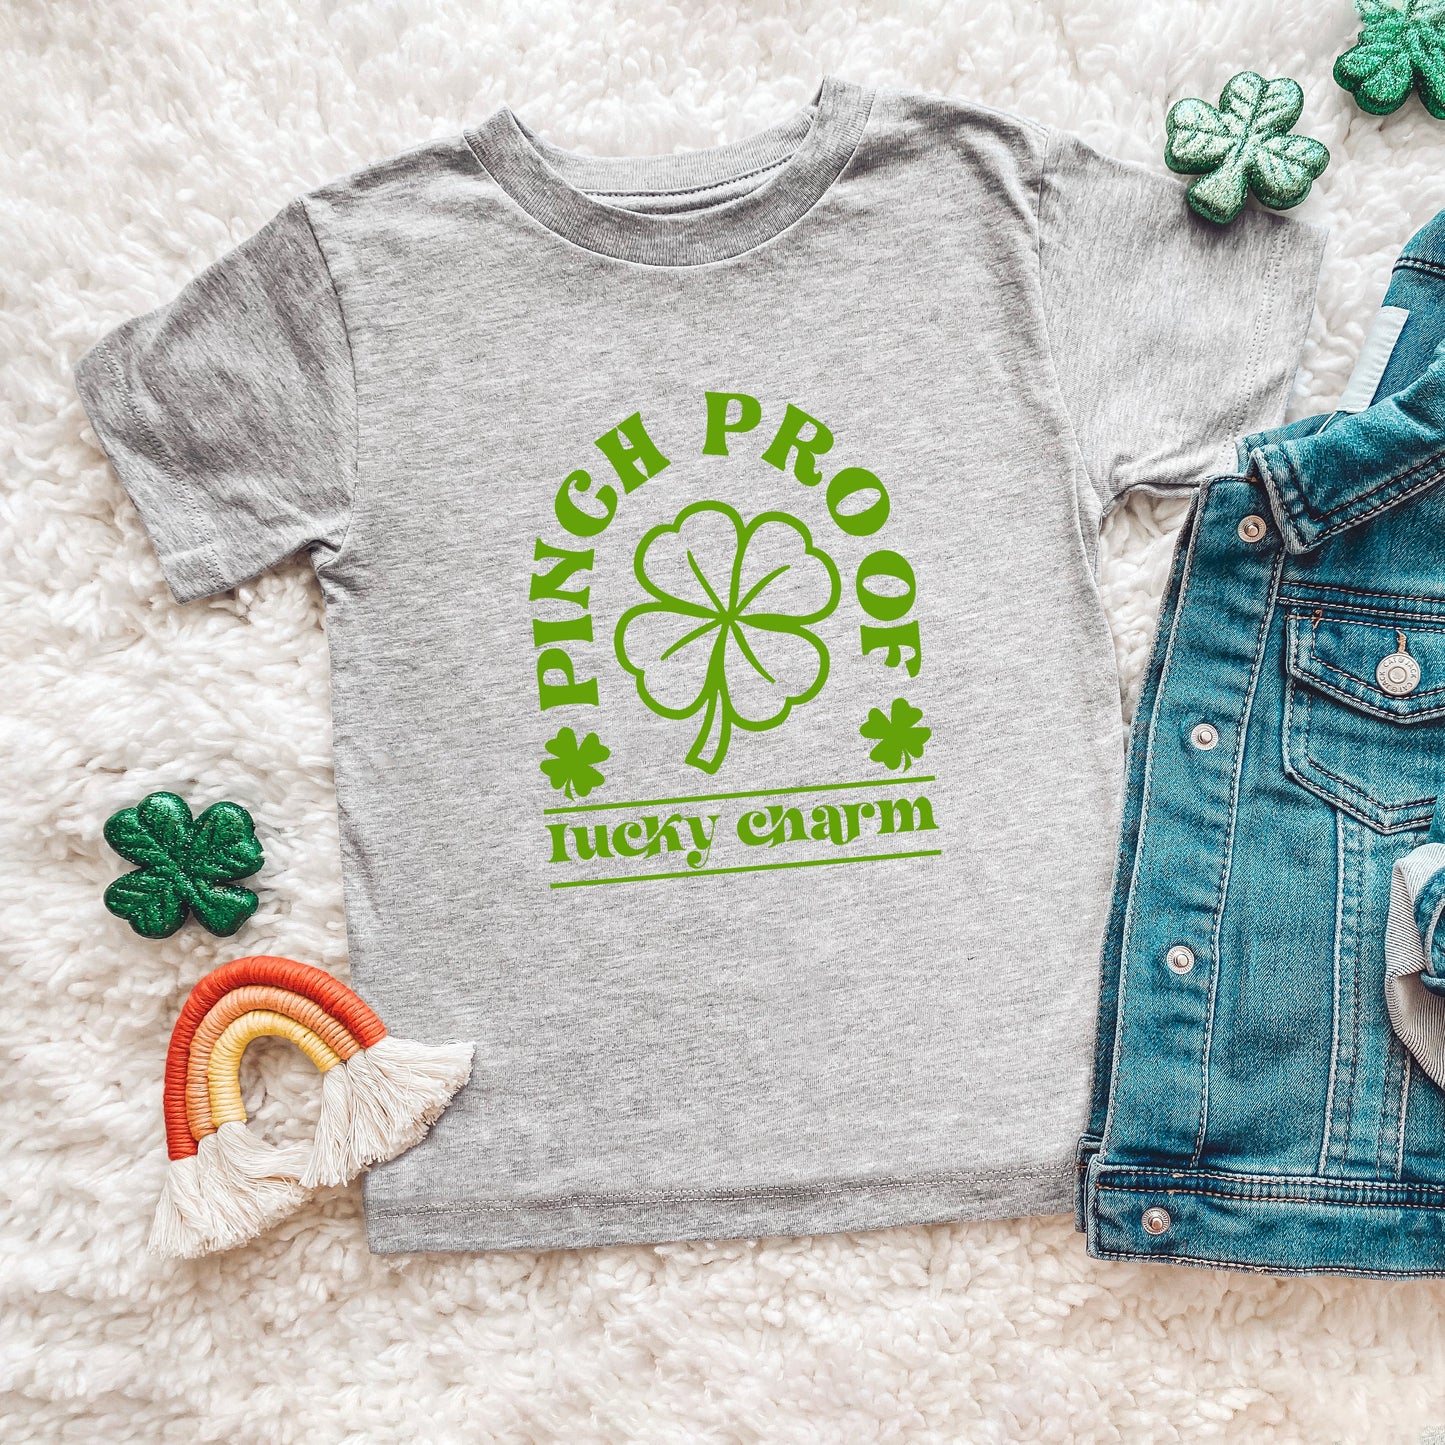 Pinch Proof Lucky Charm | Toddler Short Sleeve Crew Neck